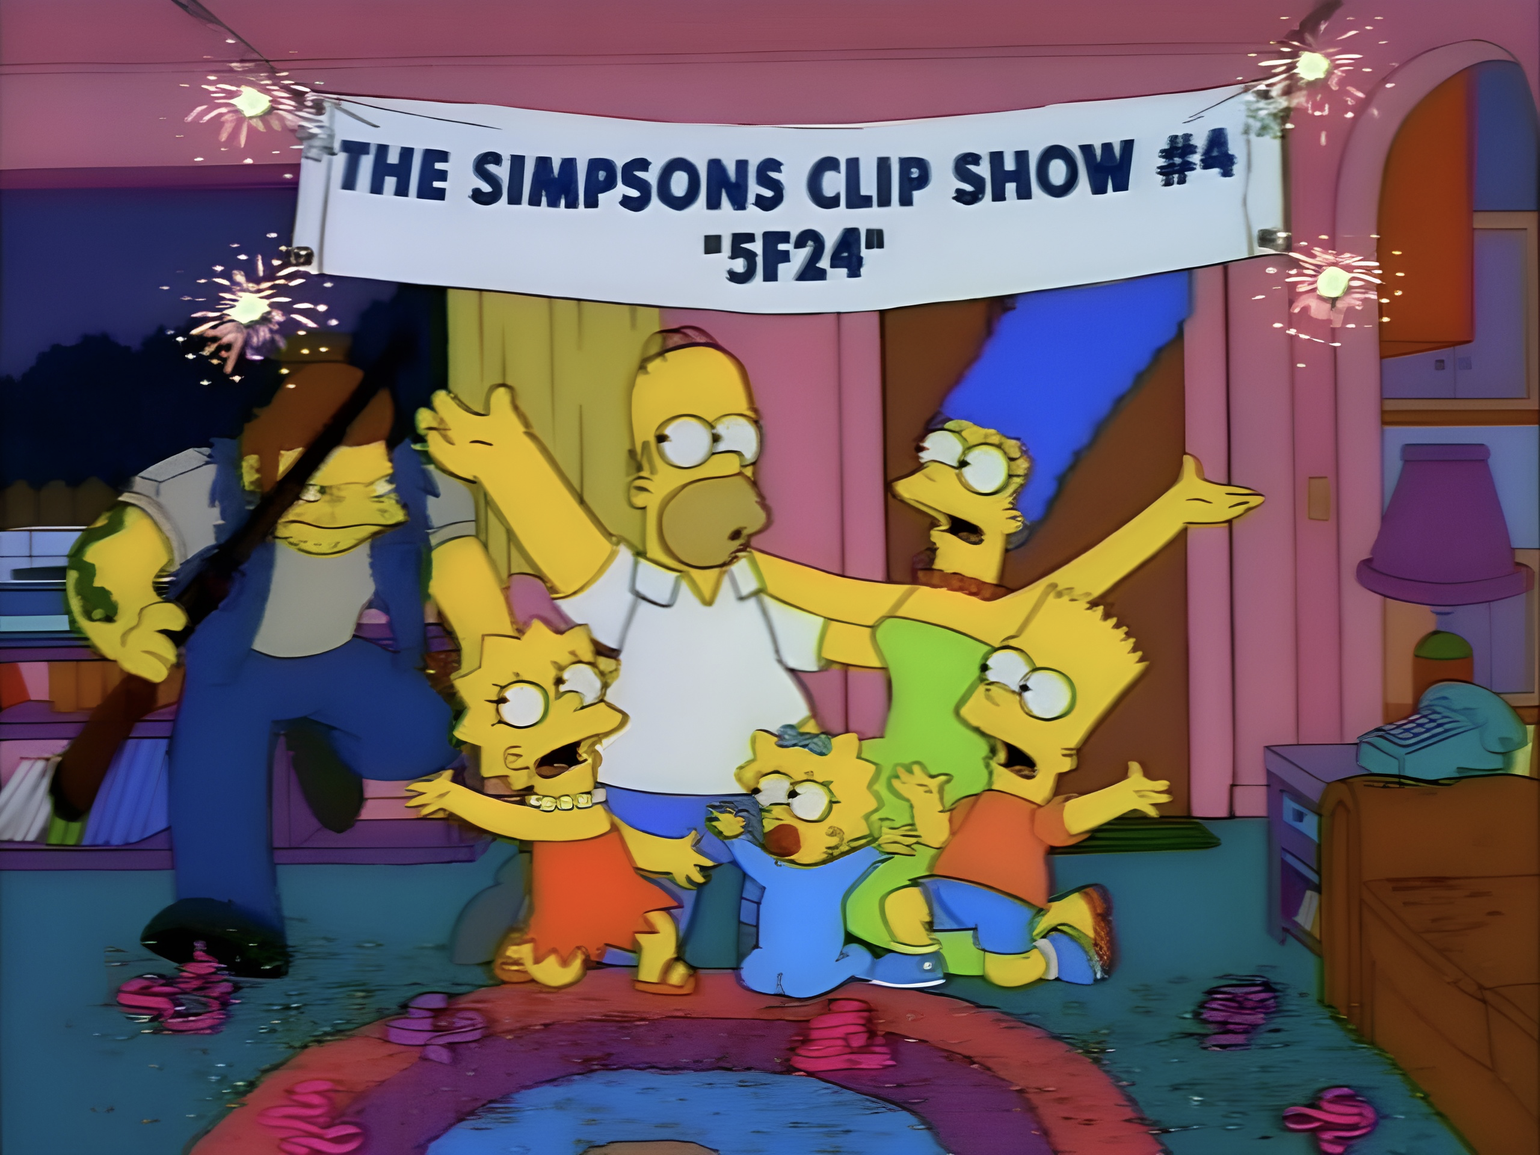 The Simpsons Clip Show #4 "5F24"